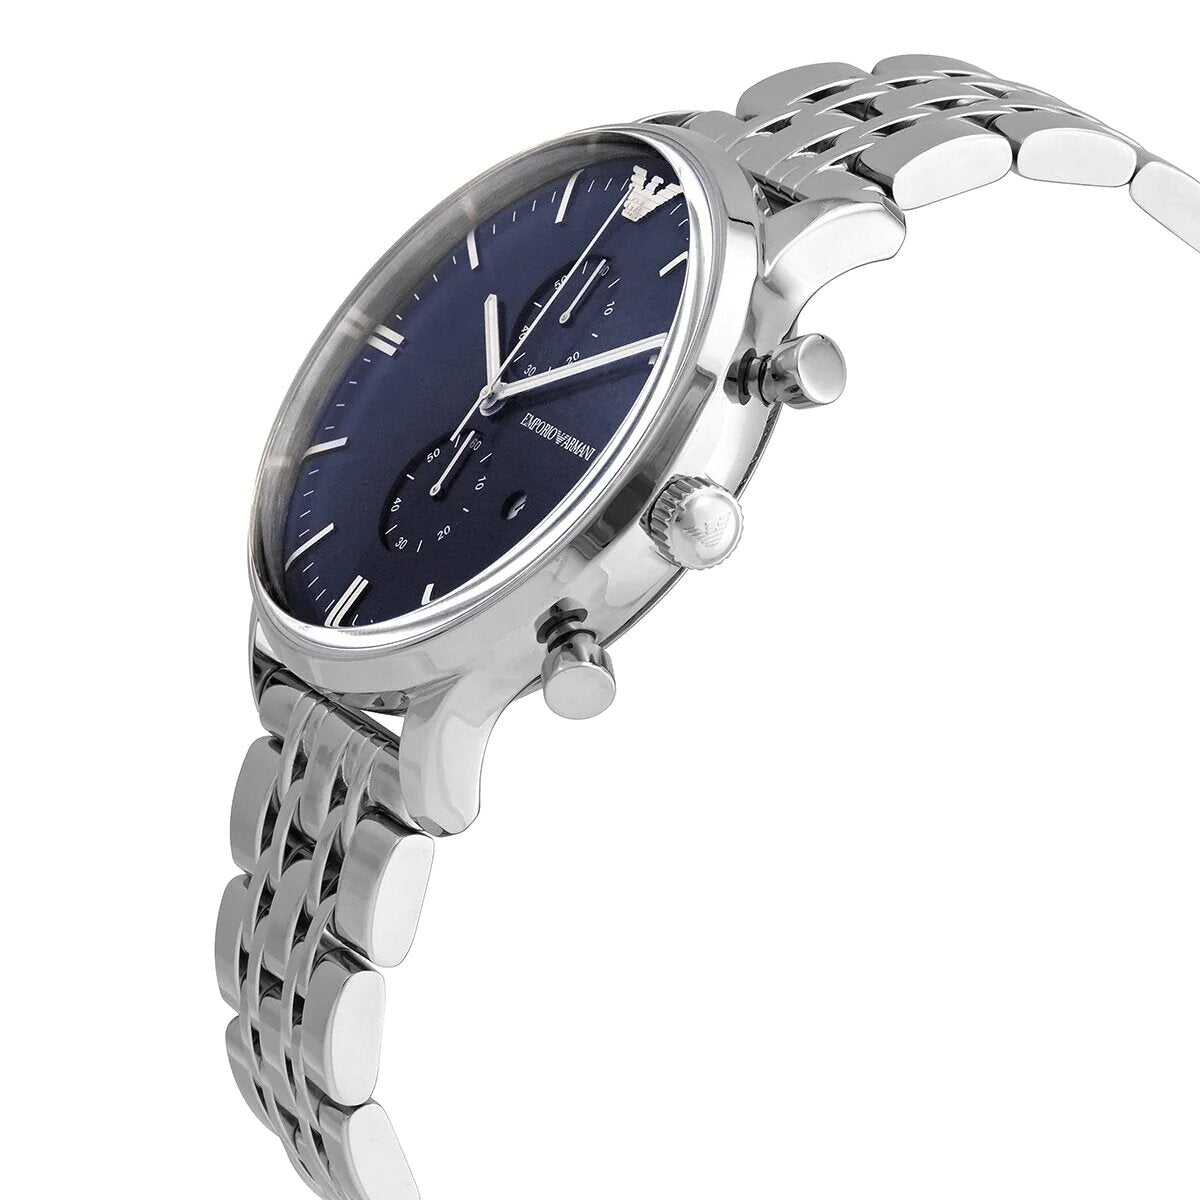 Stainless-steel Chronograph Men's Watch blue dial | AR1648